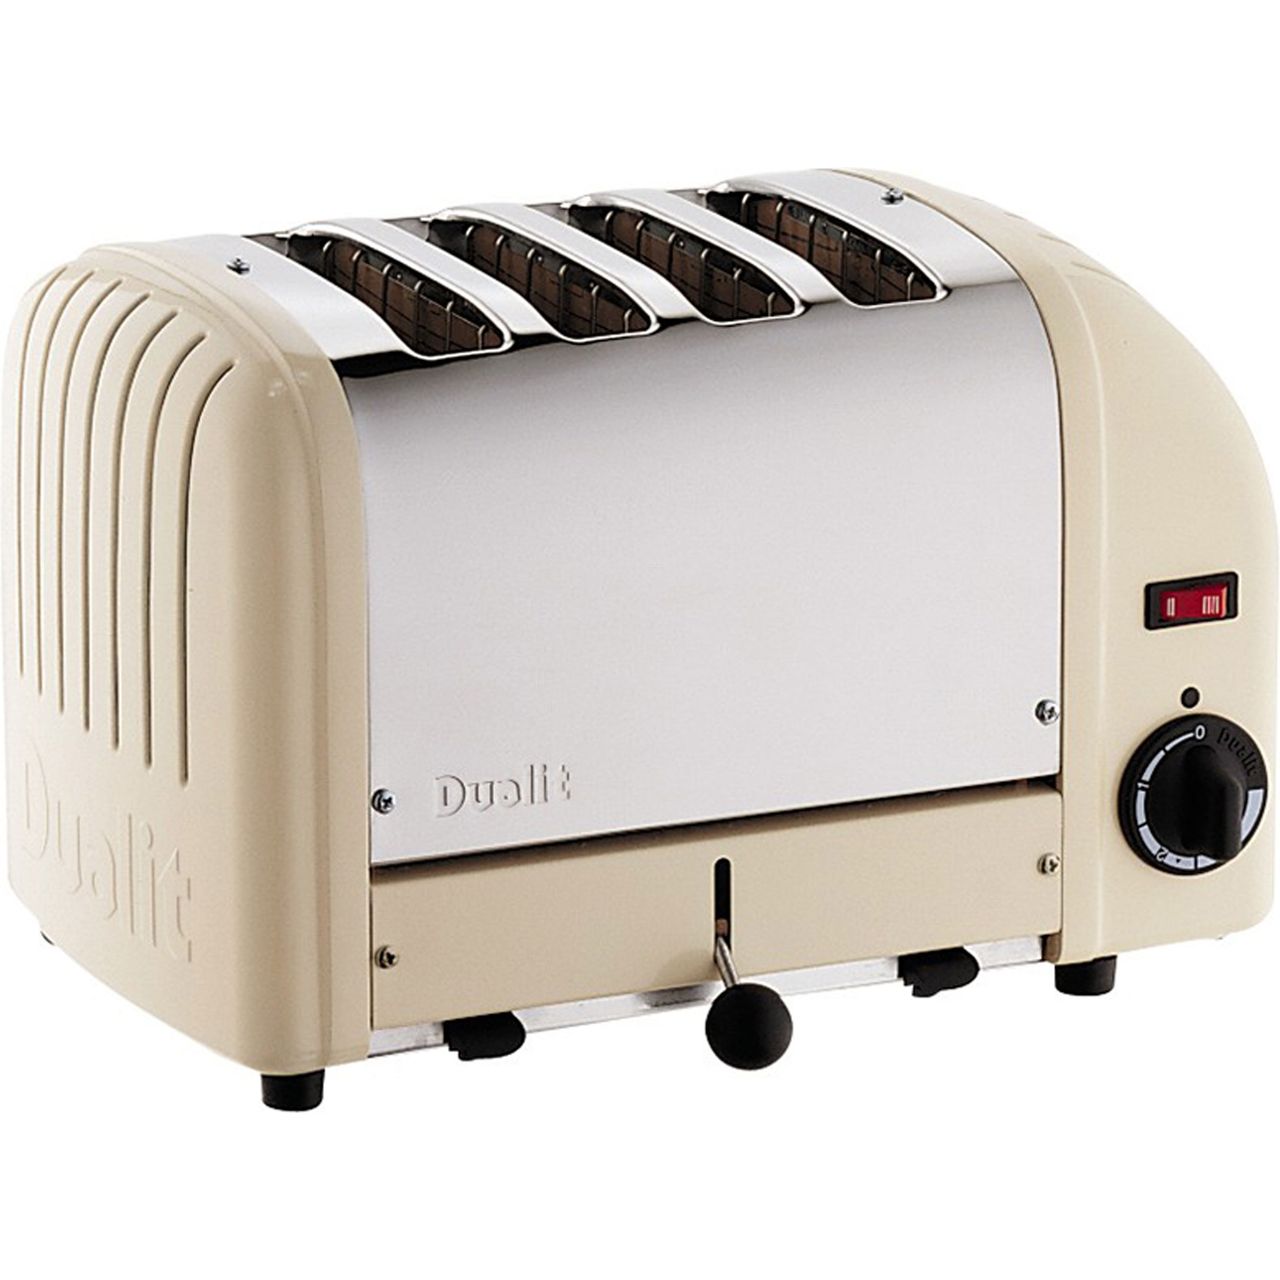 Dualit Classic Vario 40354 4 Slice Toaster Review